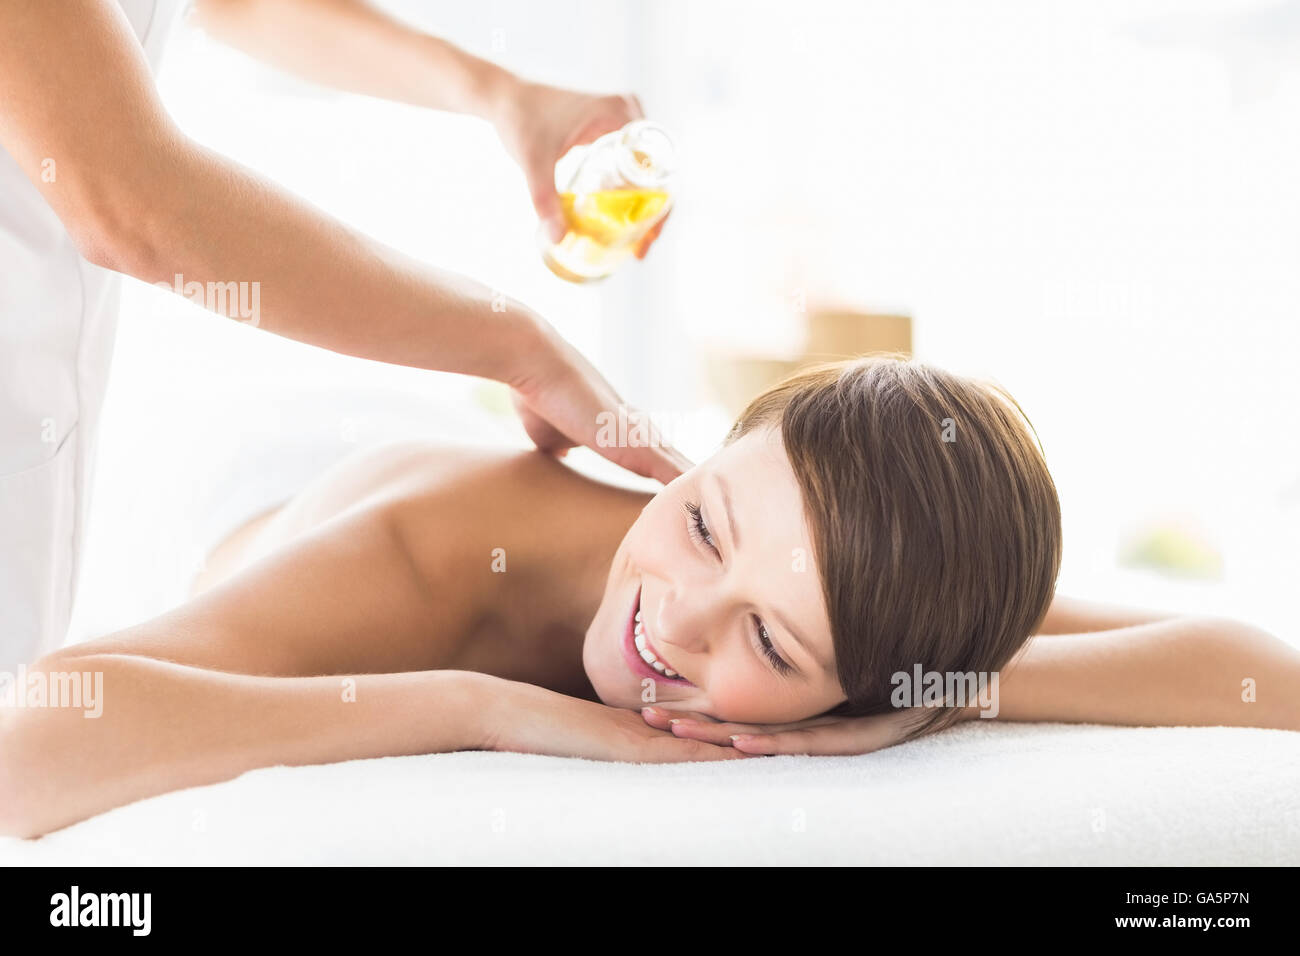 Masseur pouring massage oil on woman Stock Photo